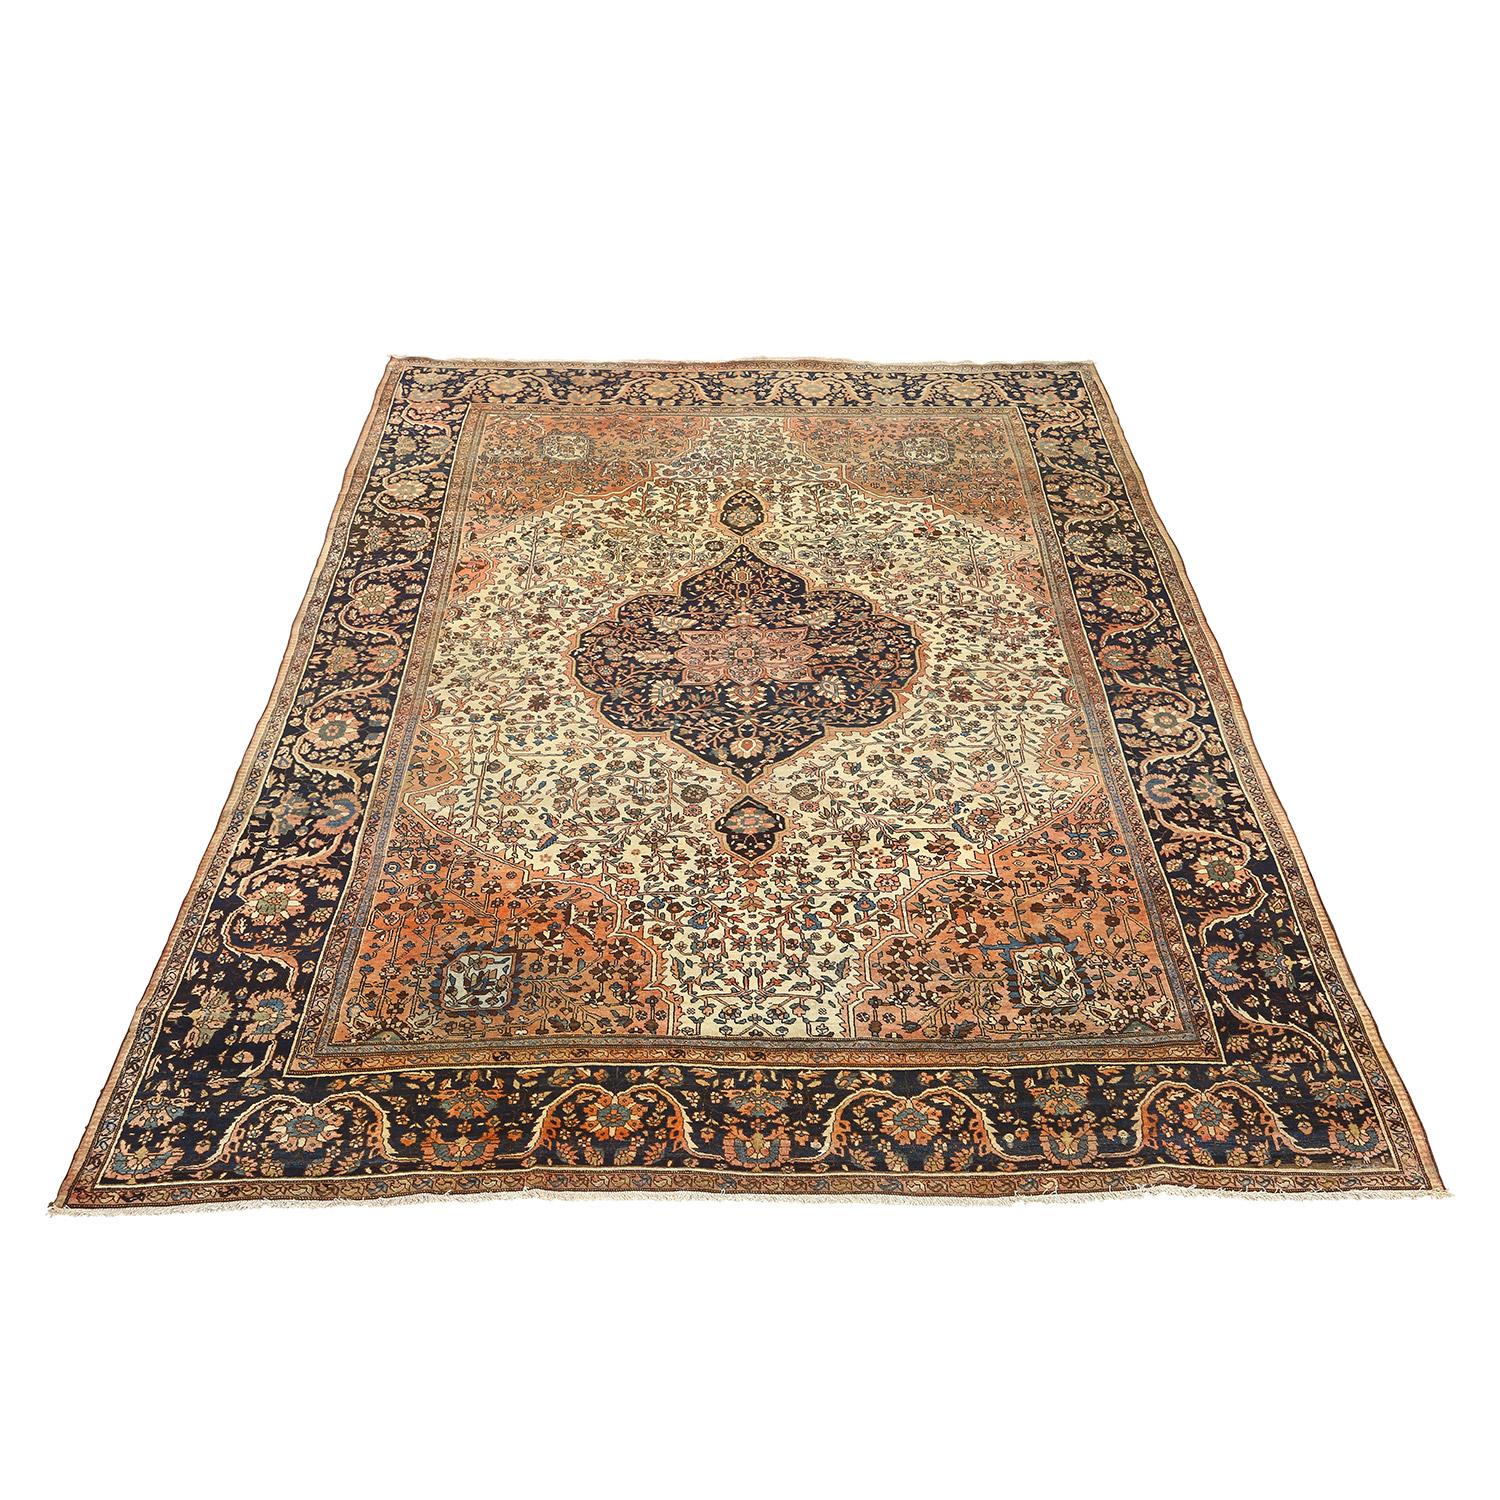 This Antique Farahan is a masterpiece of enduring opulence and unparalleled craftsmanship. Originating from the esteemed Farahan region in Persia, these rugs are not just floor coverings; they are exquisite works of art that radiate timeless